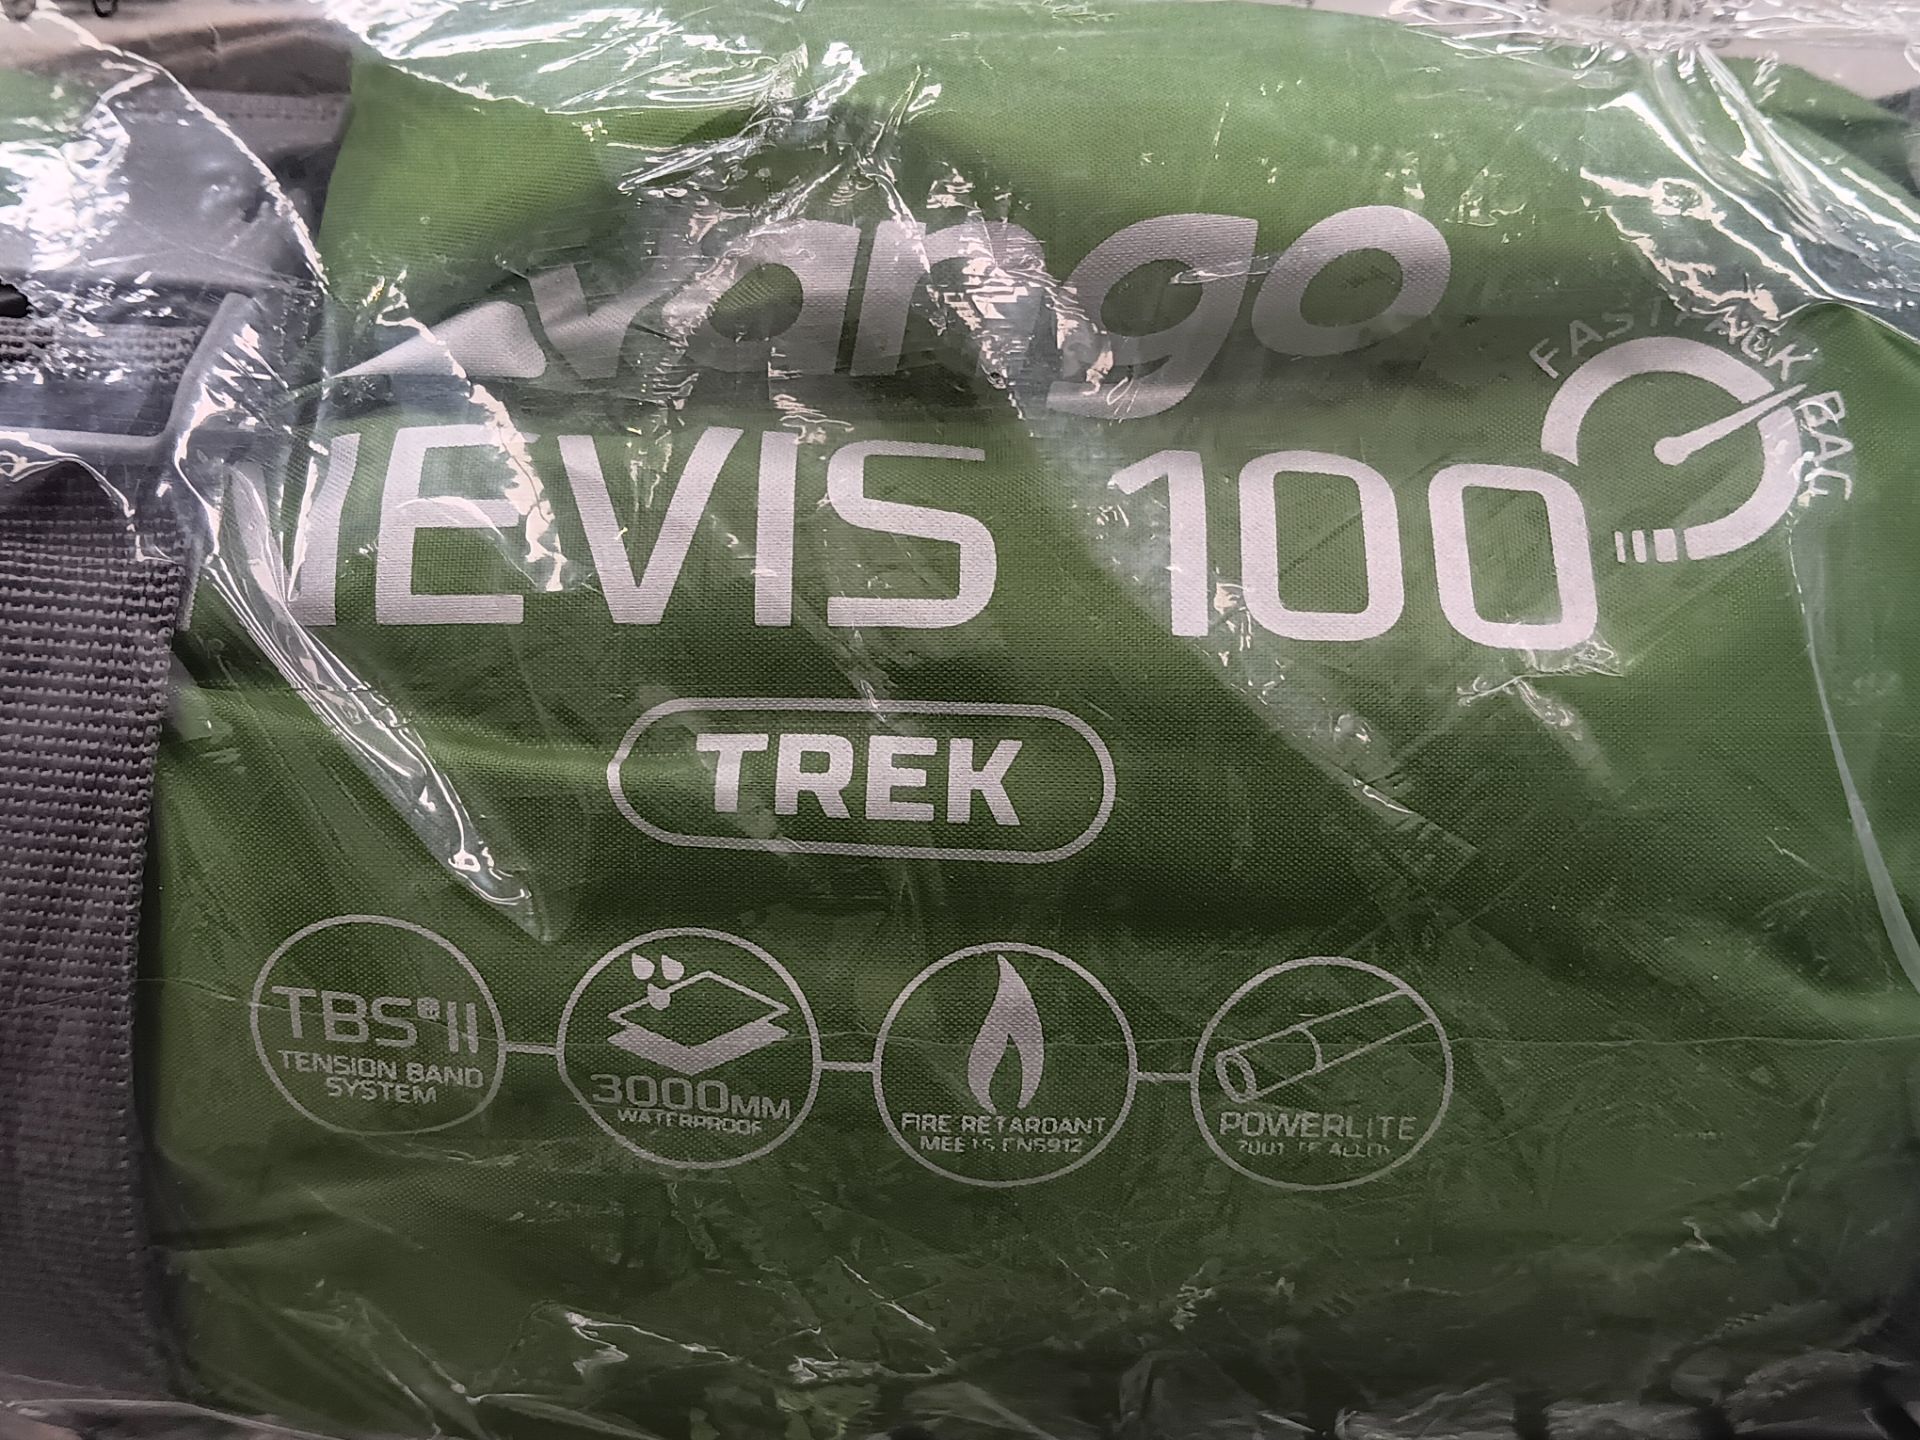 Vango Nevis 100 Trek Tent (Please note, Viewing Strongly Recommended - Eddisons have not inspected - Image 2 of 2